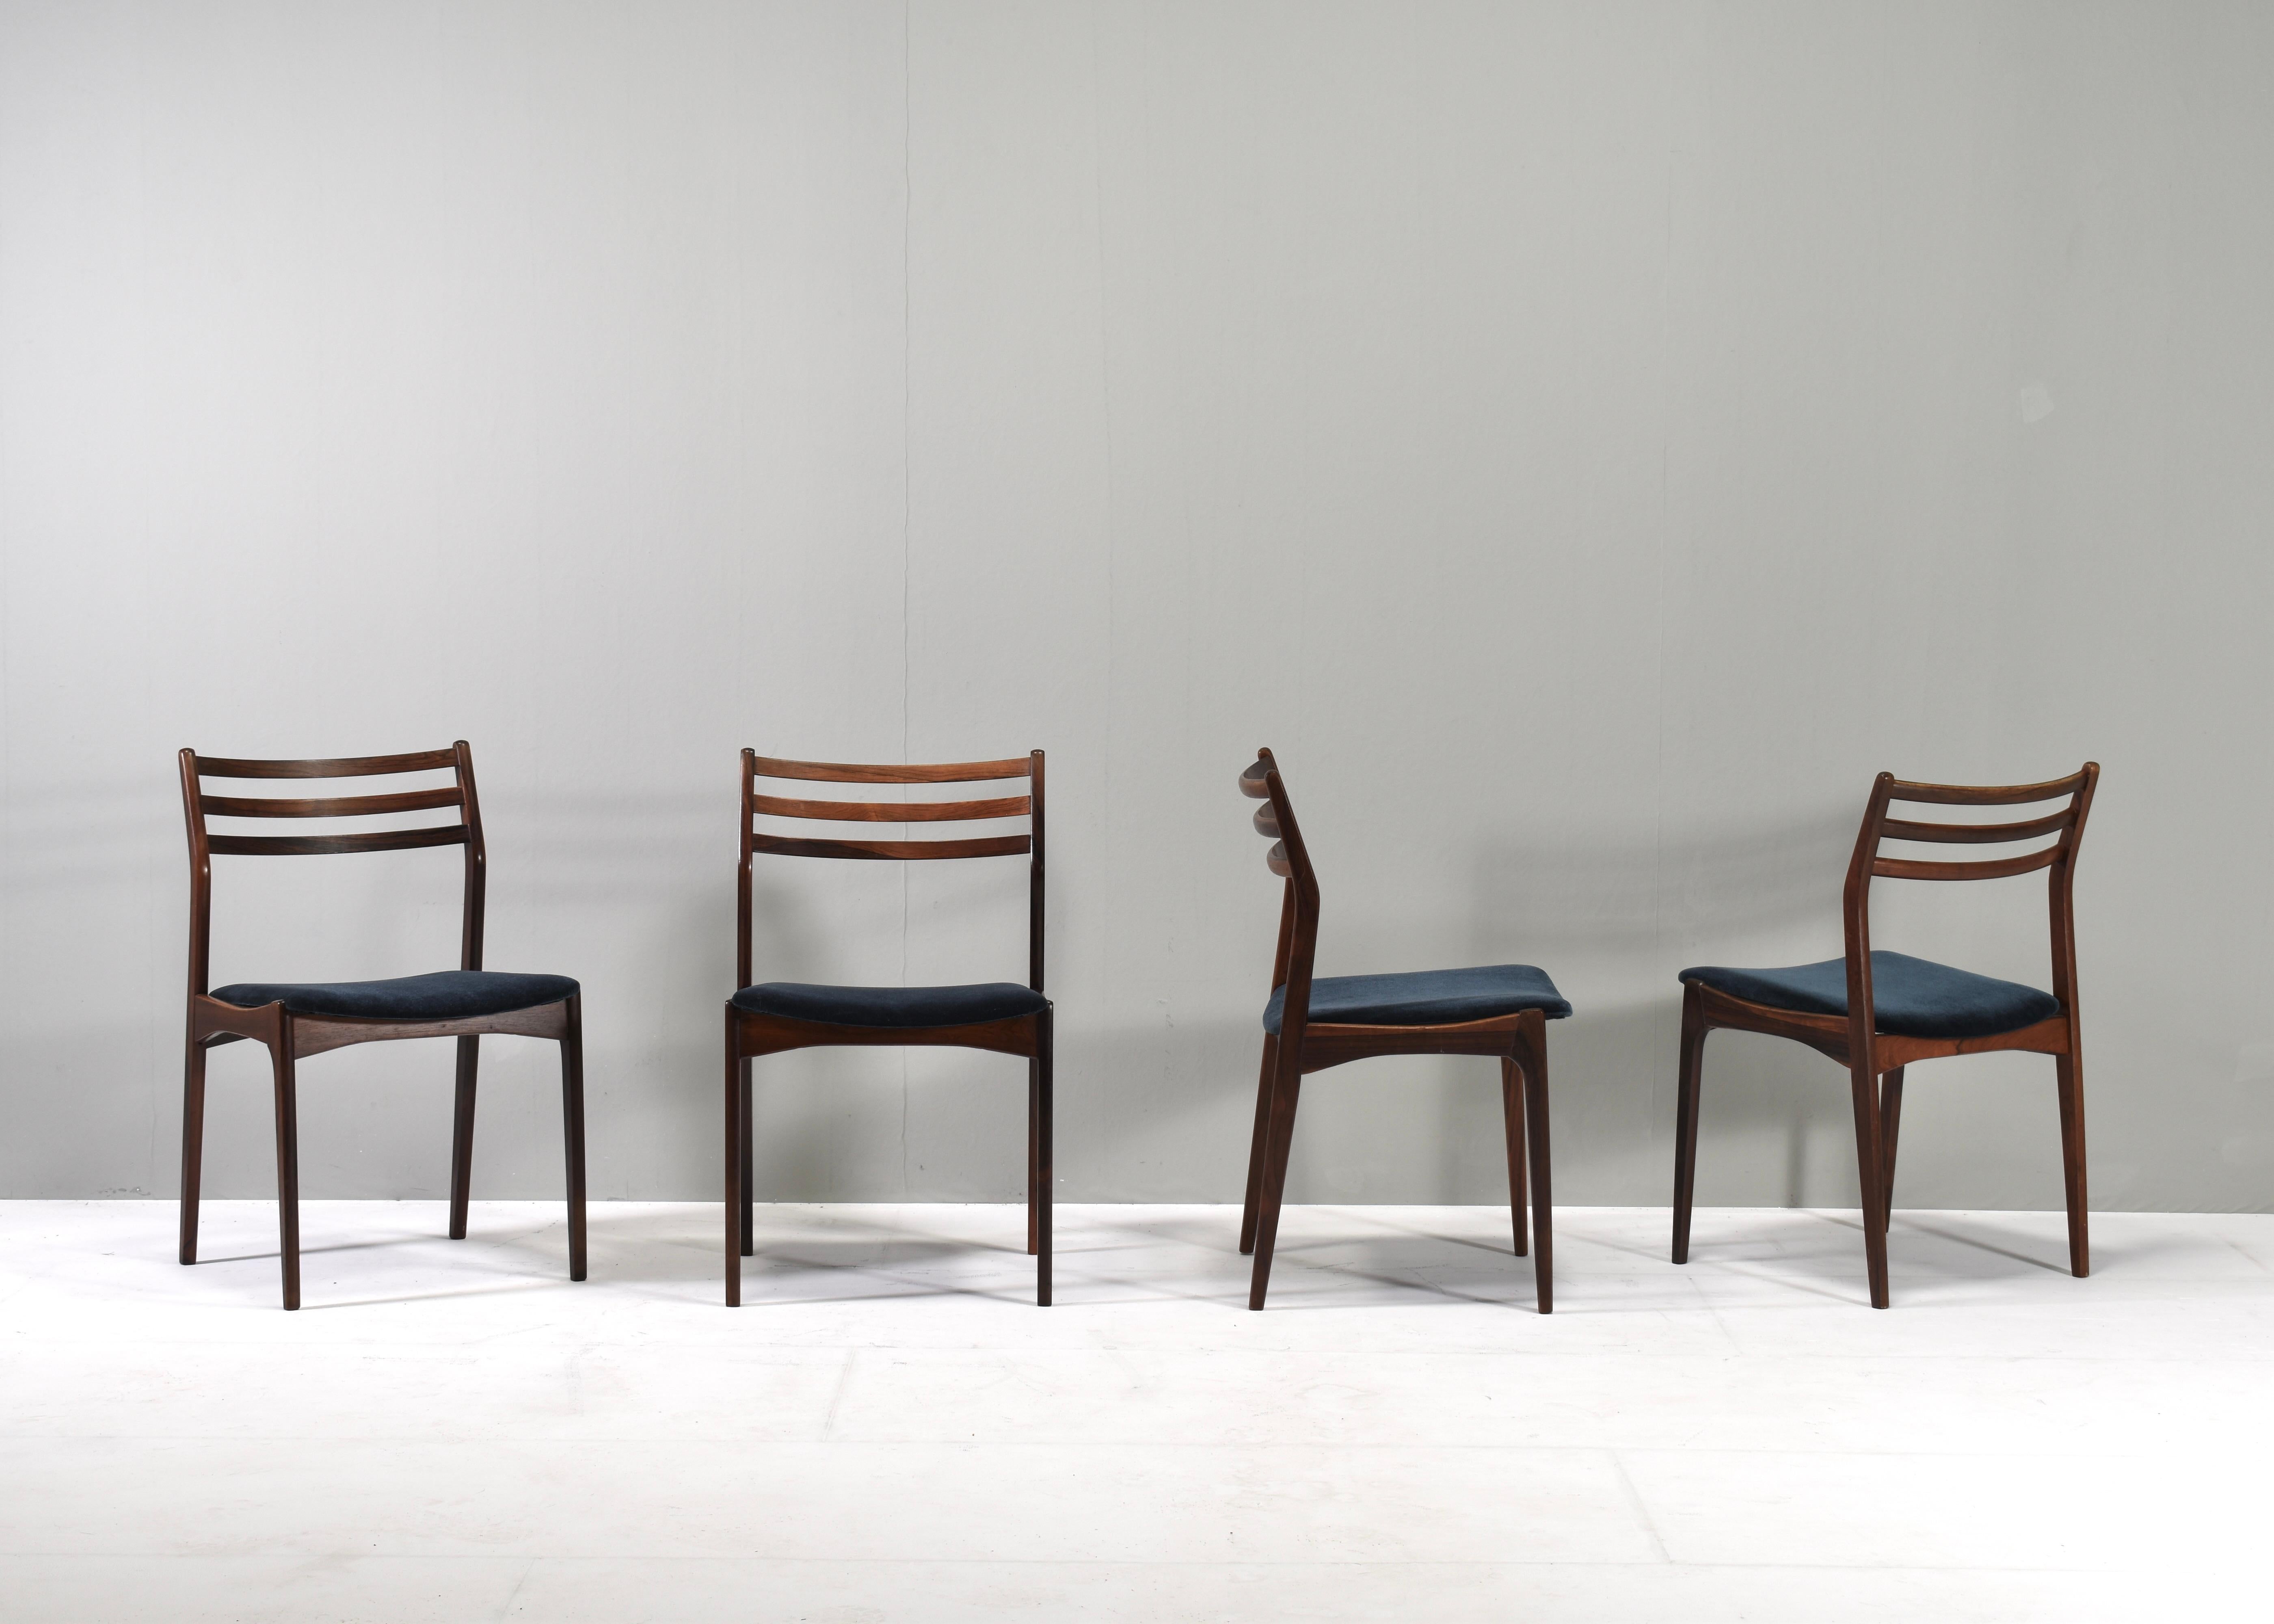 Elegant set of four Scandinavian dining chairs by or in the style of Johannes Andersen / Eriksen Vestervig / Arne Vodder – Denmark, circa 1960. The chairs are reupholstered in a beautiful dark blue / petrol velvet fabric by Charmelle.

Designer: